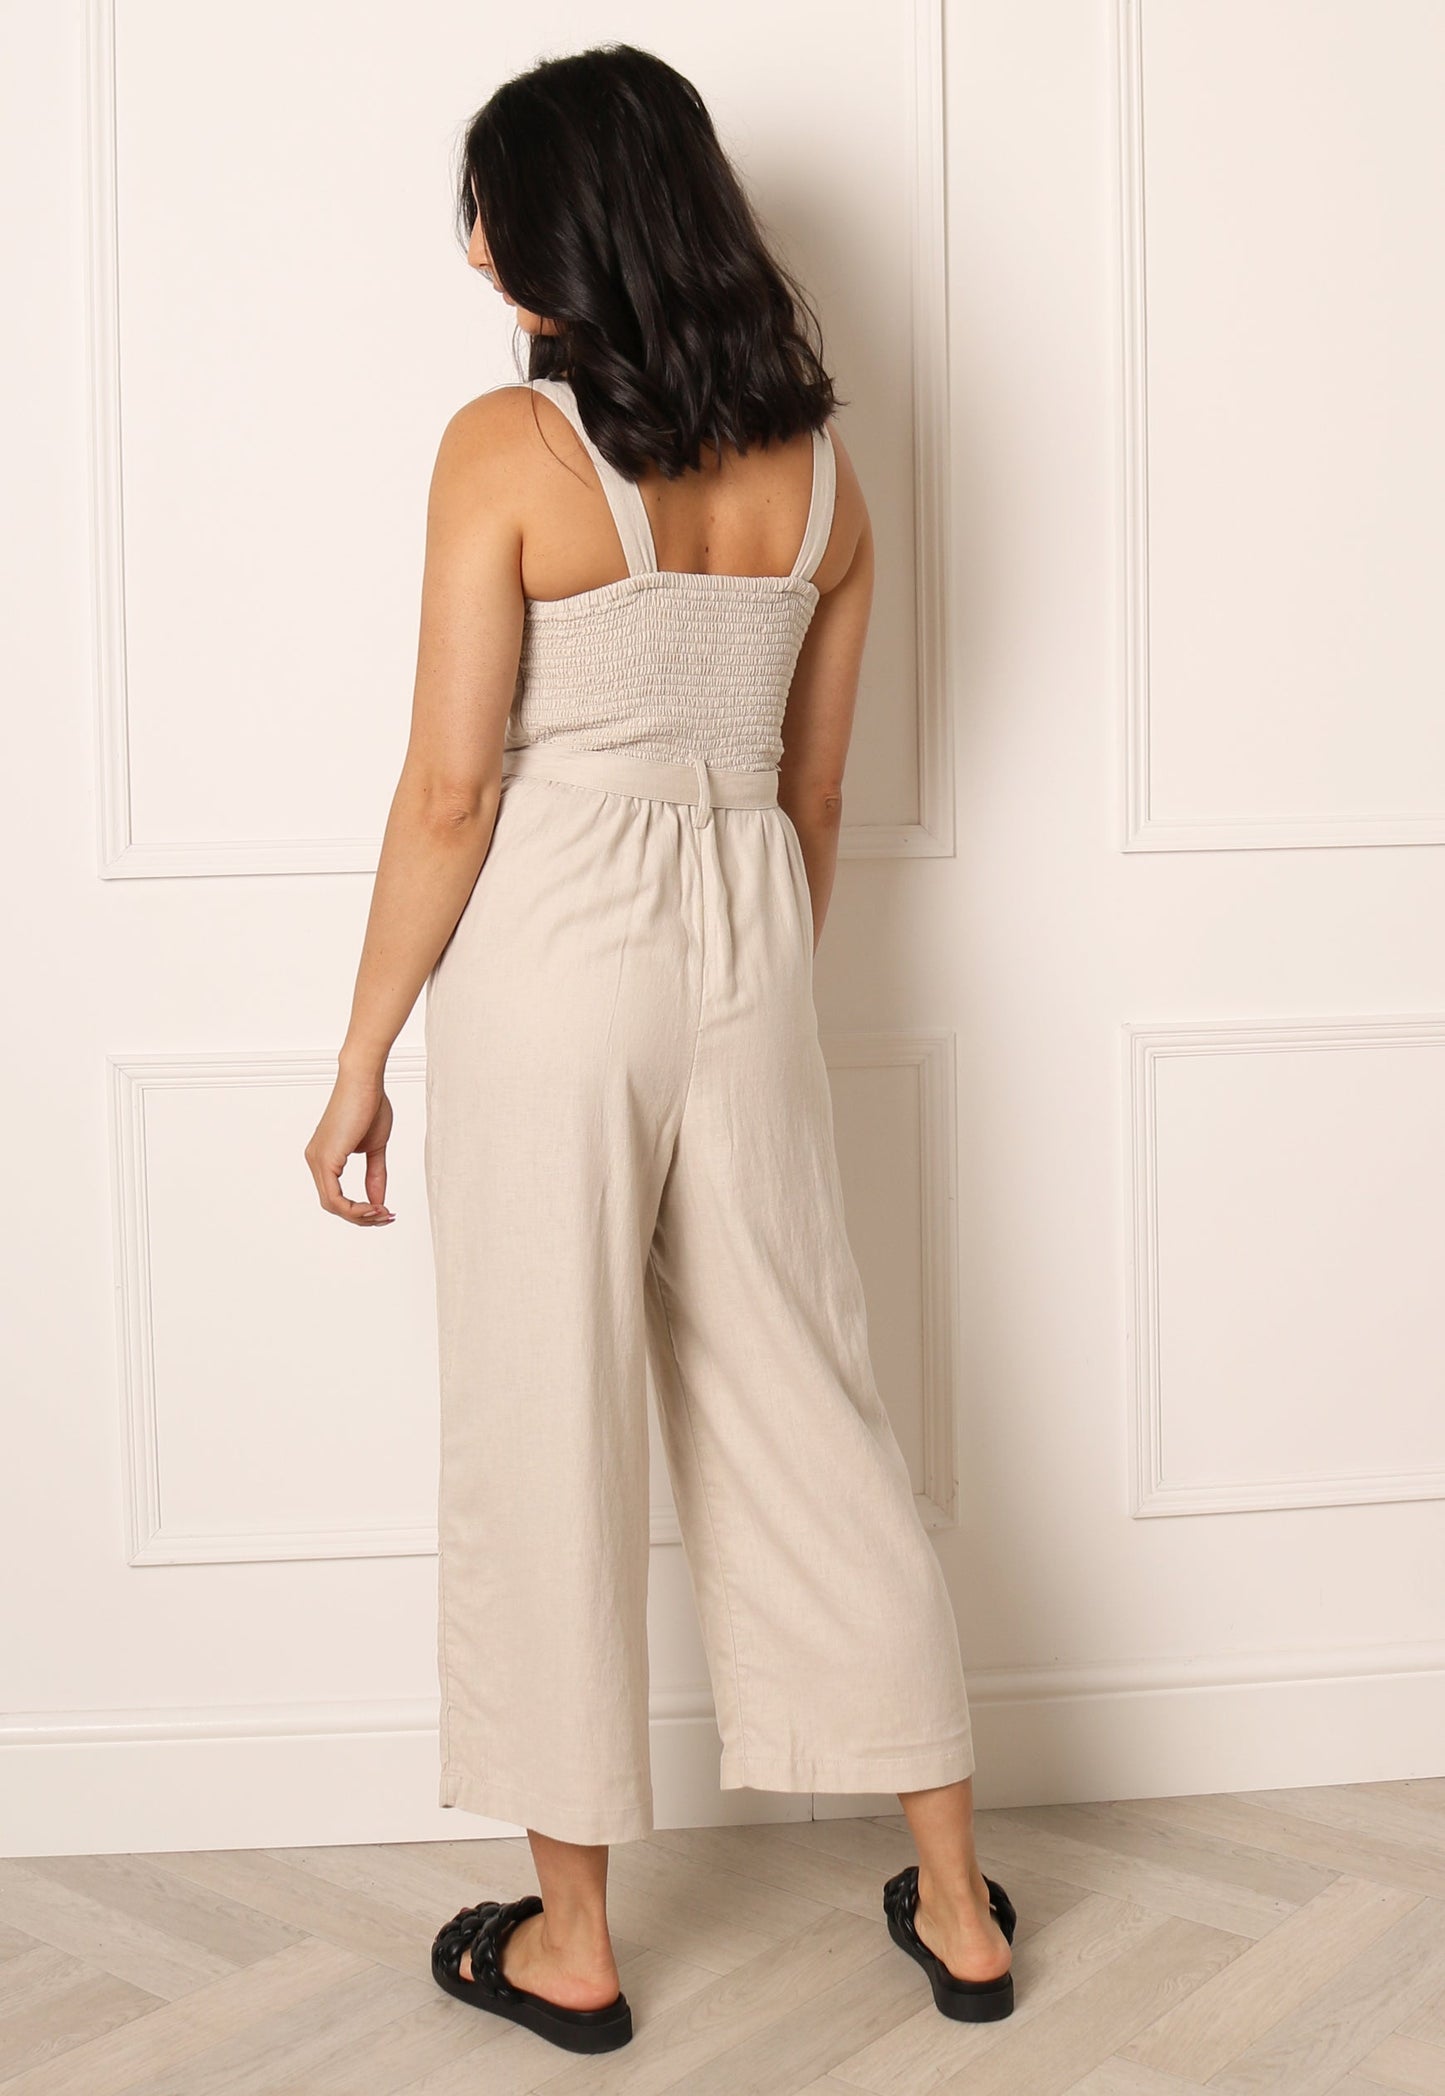 ONLY Caro Linen Strappy Culotte Jumpsuit in Beige - One Nation Clothing